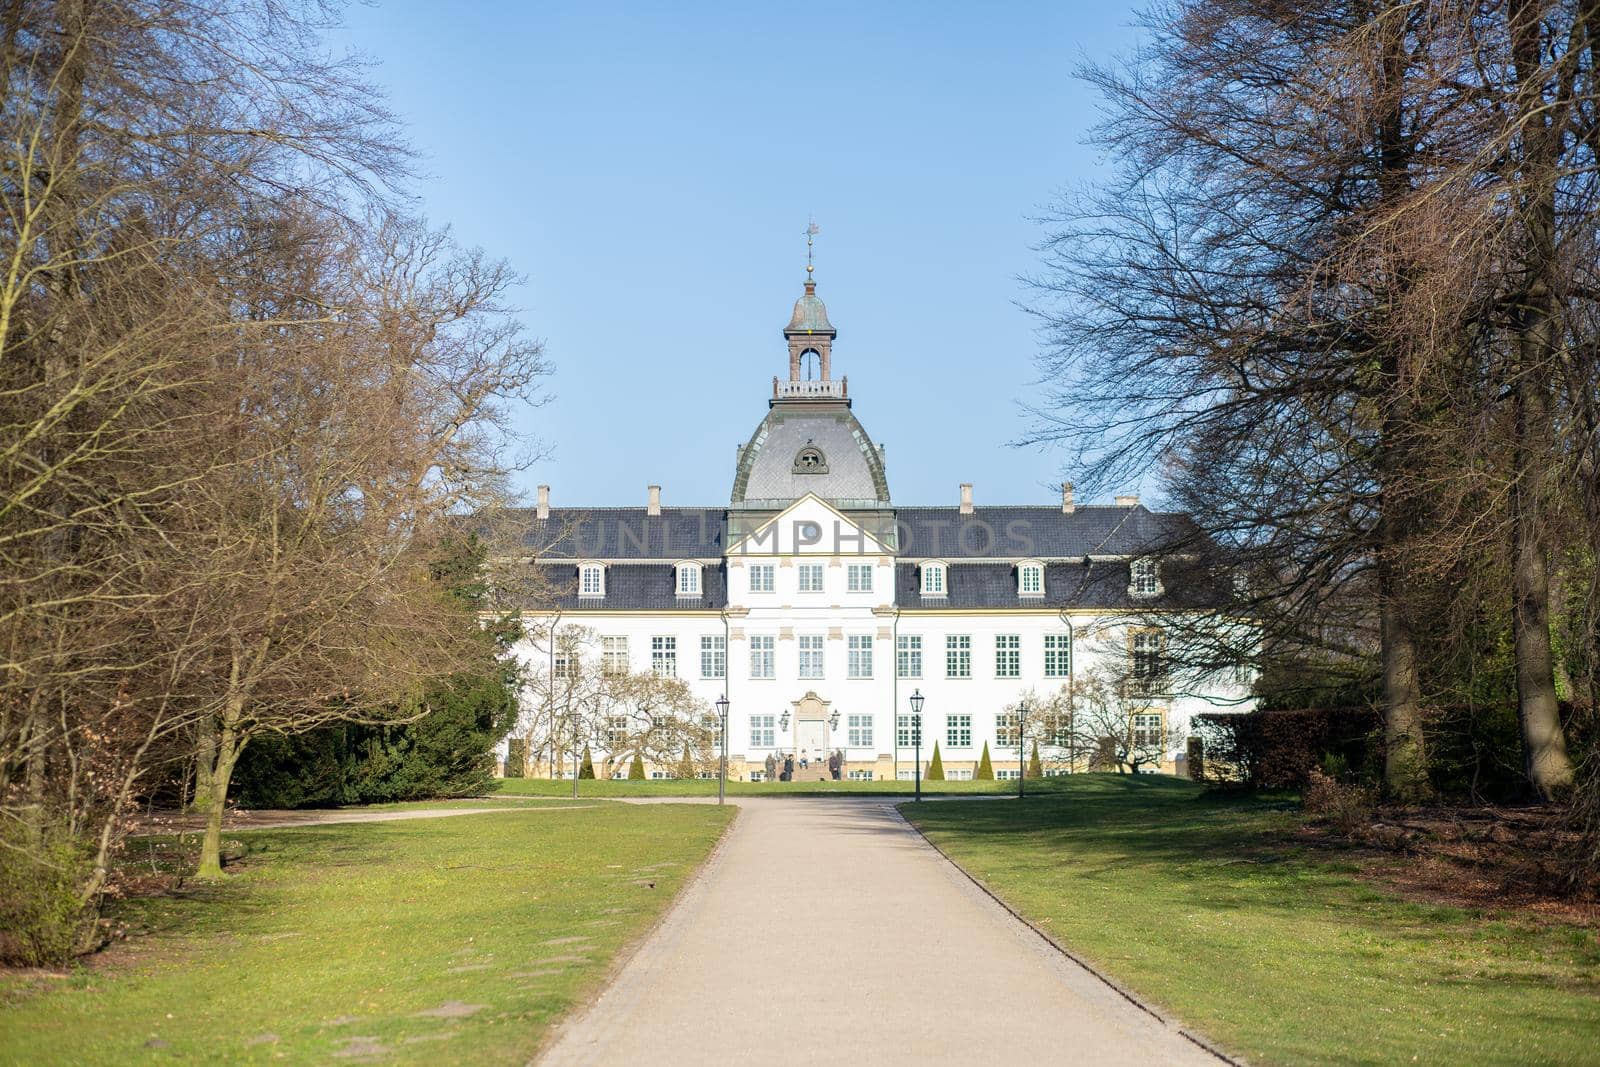 CharlottenlundDenmark - April 06, 2020: Exterior view of Charlottenlund Palace